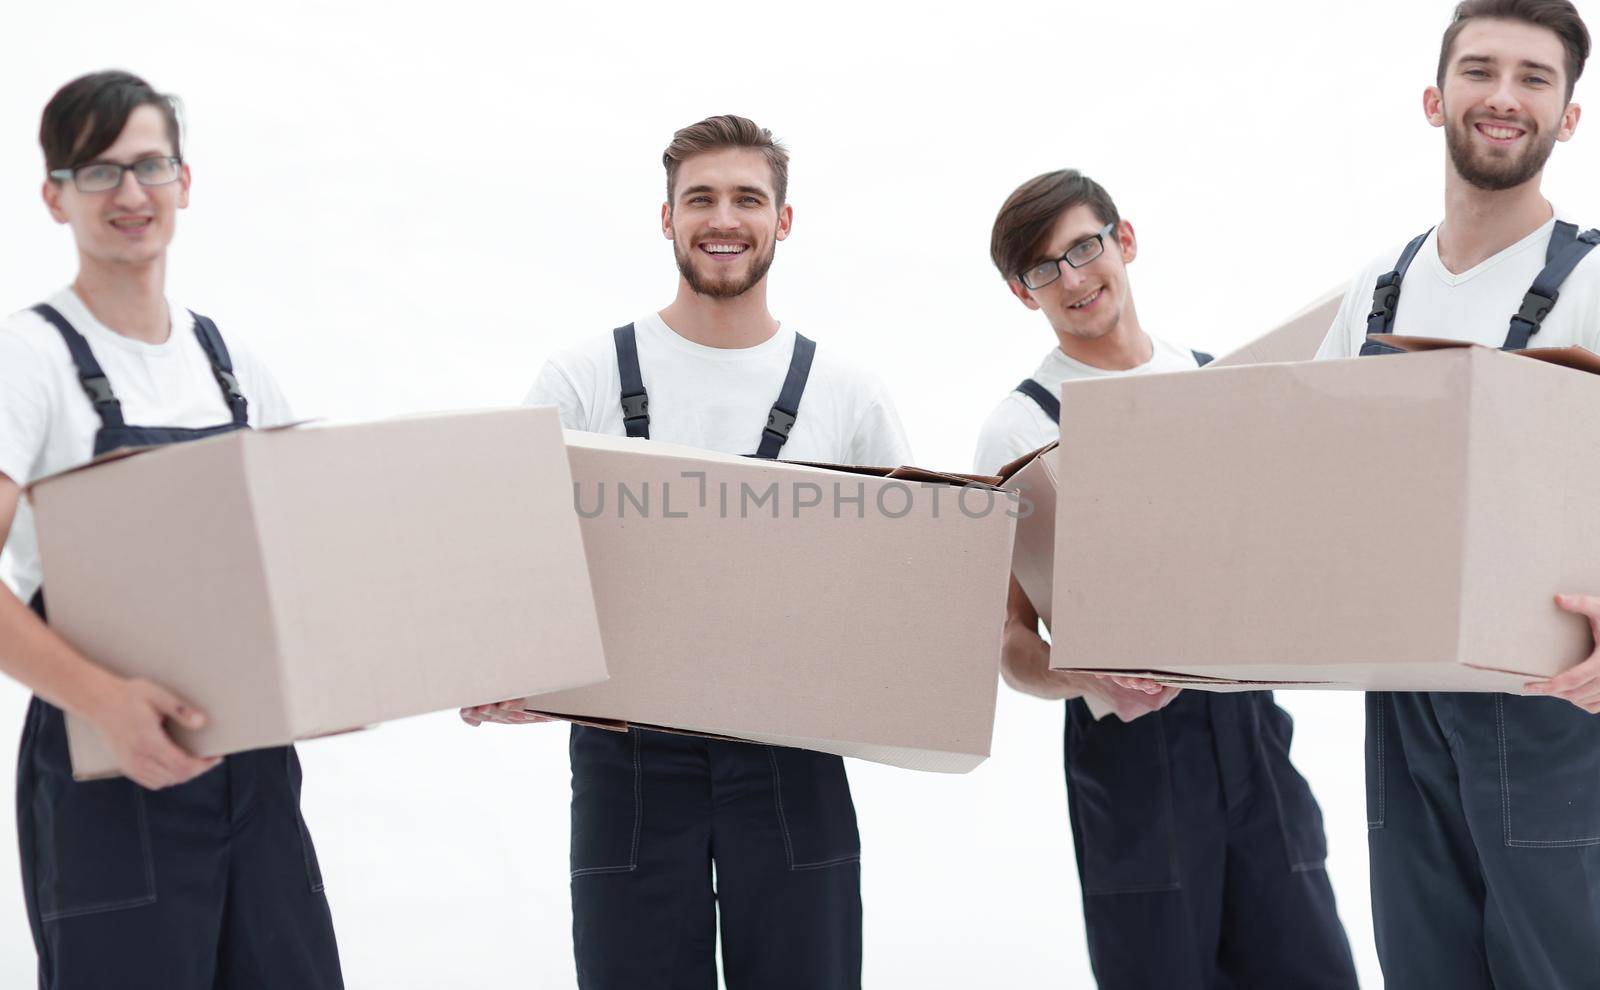 photo workers holding boxes when moving flats, by asdf